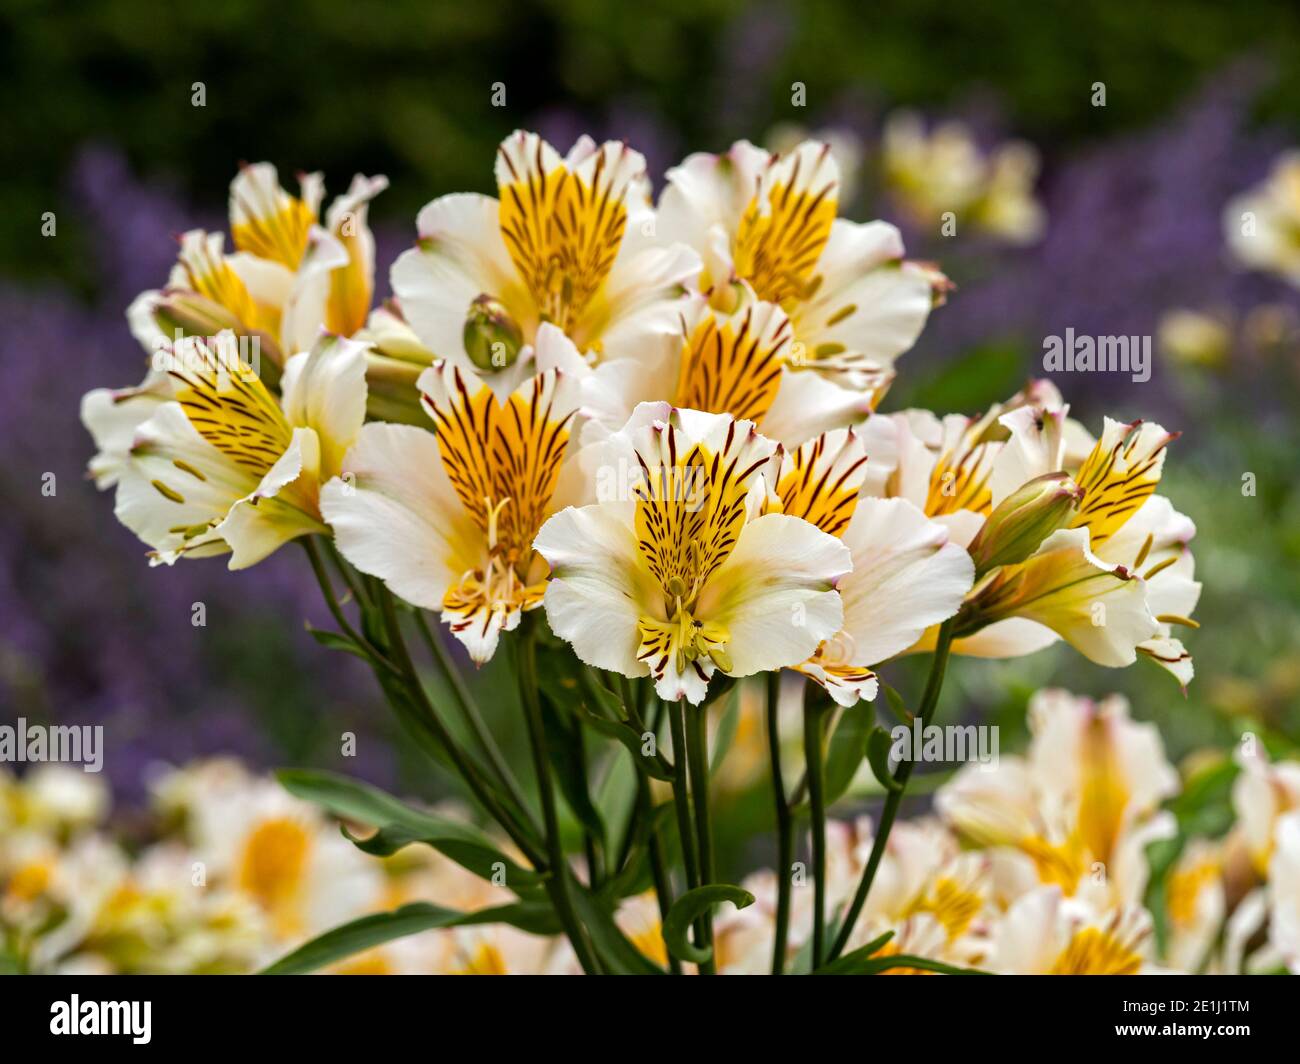 Lovely white and yellow Alstroemeria Peruvian lily or lily of the Incas flowering in a garden Stock Photo